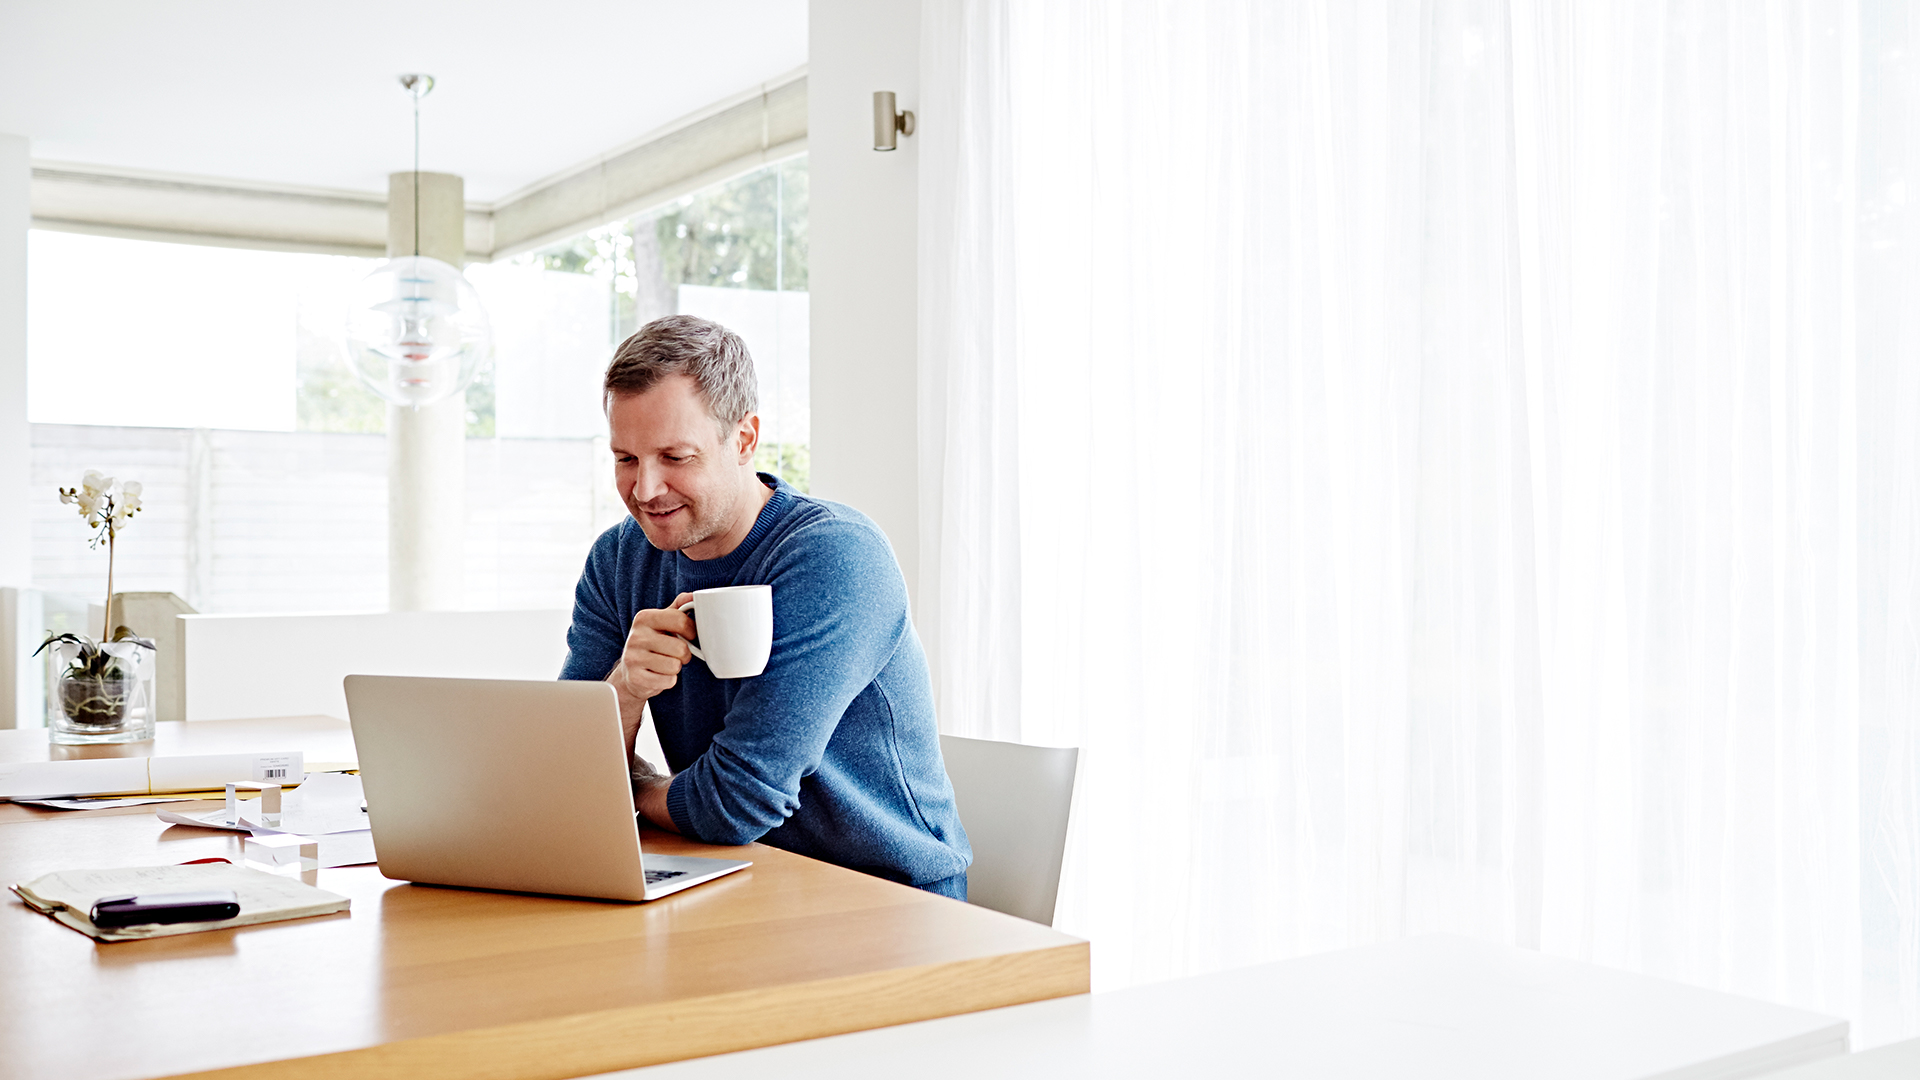 Image of a man drinking coffee while working